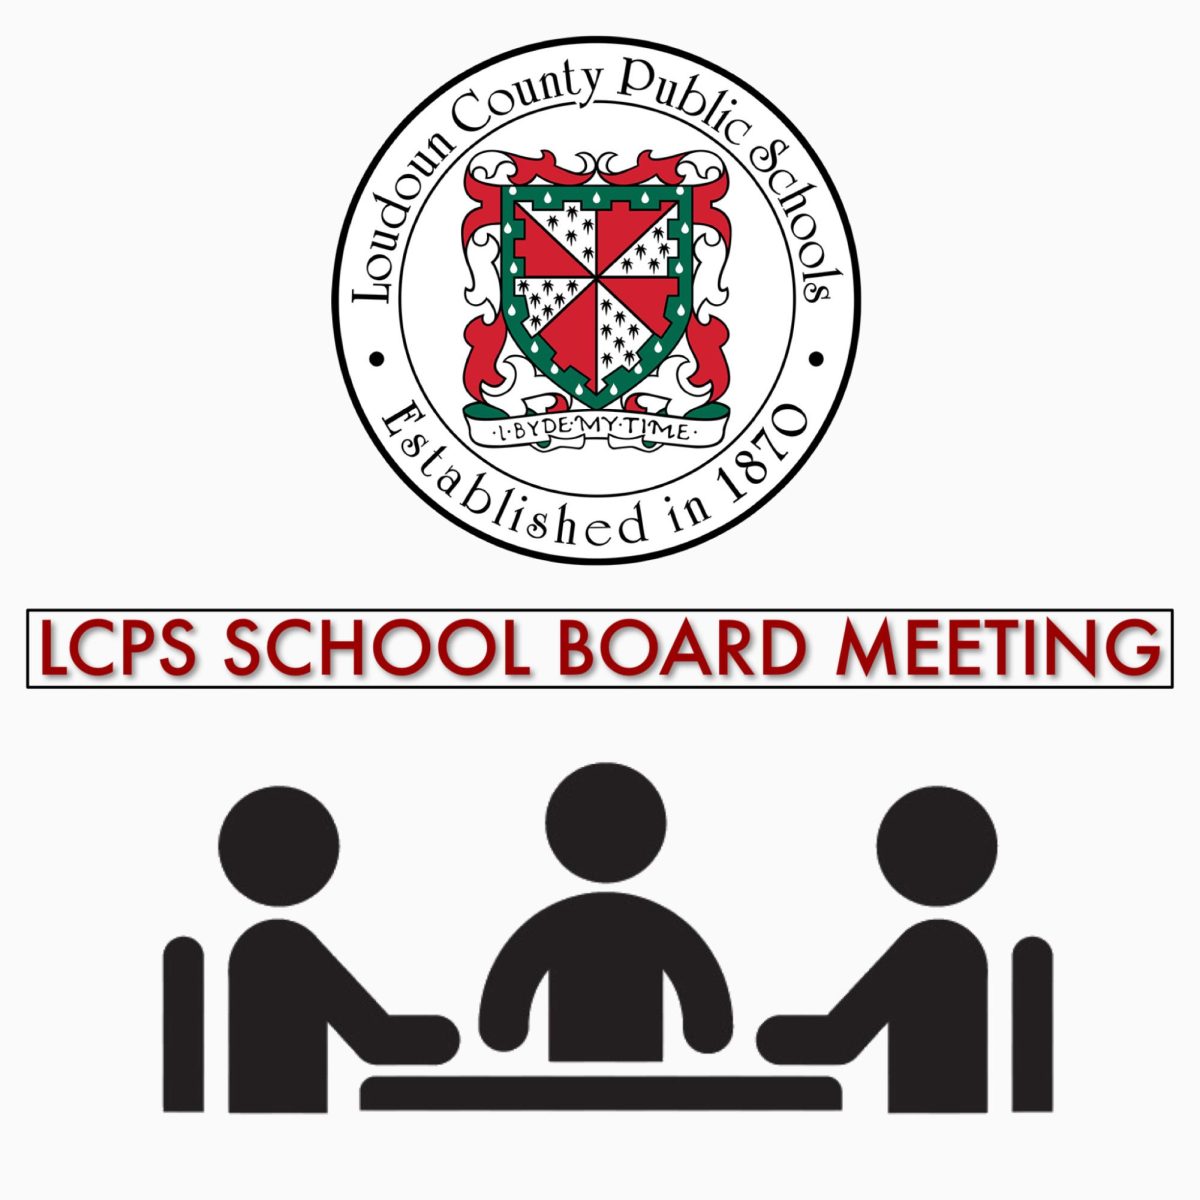 During+the+Oct.+24+school+board+meeting%2C+members+discussed+budget+and+legislative+changes+for+the+upcoming+school+year%2C+clarified+uncertainties+about+bus+misconduct+and+security%2C+and+made+several+revisions+to+previous+policies.